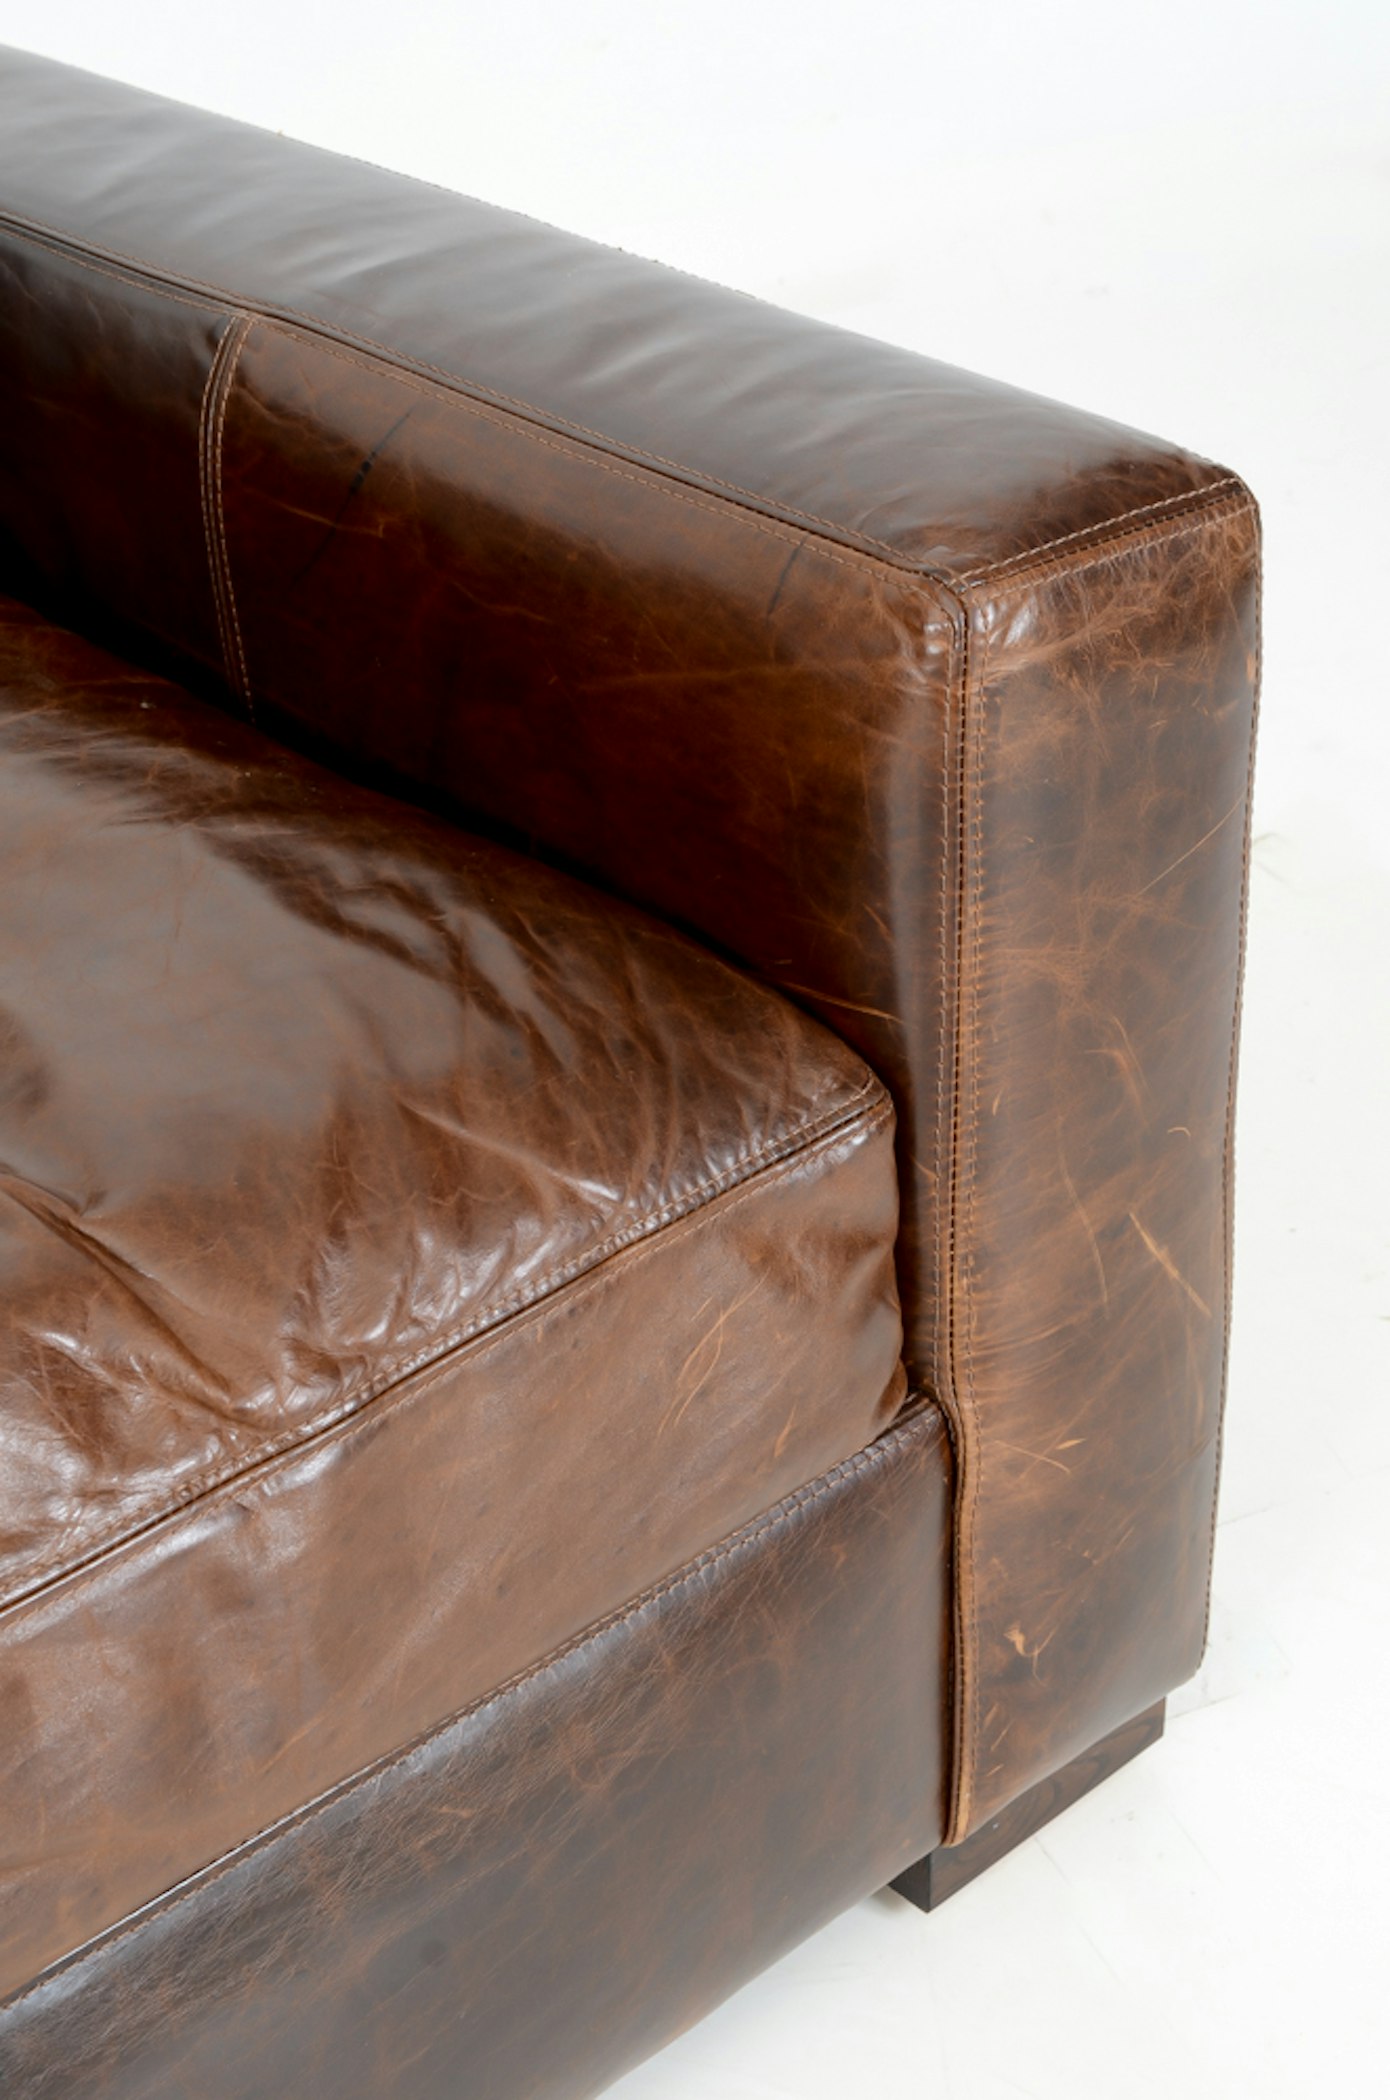 Is Leather Better? Pros and Cons of Leather Furniture 